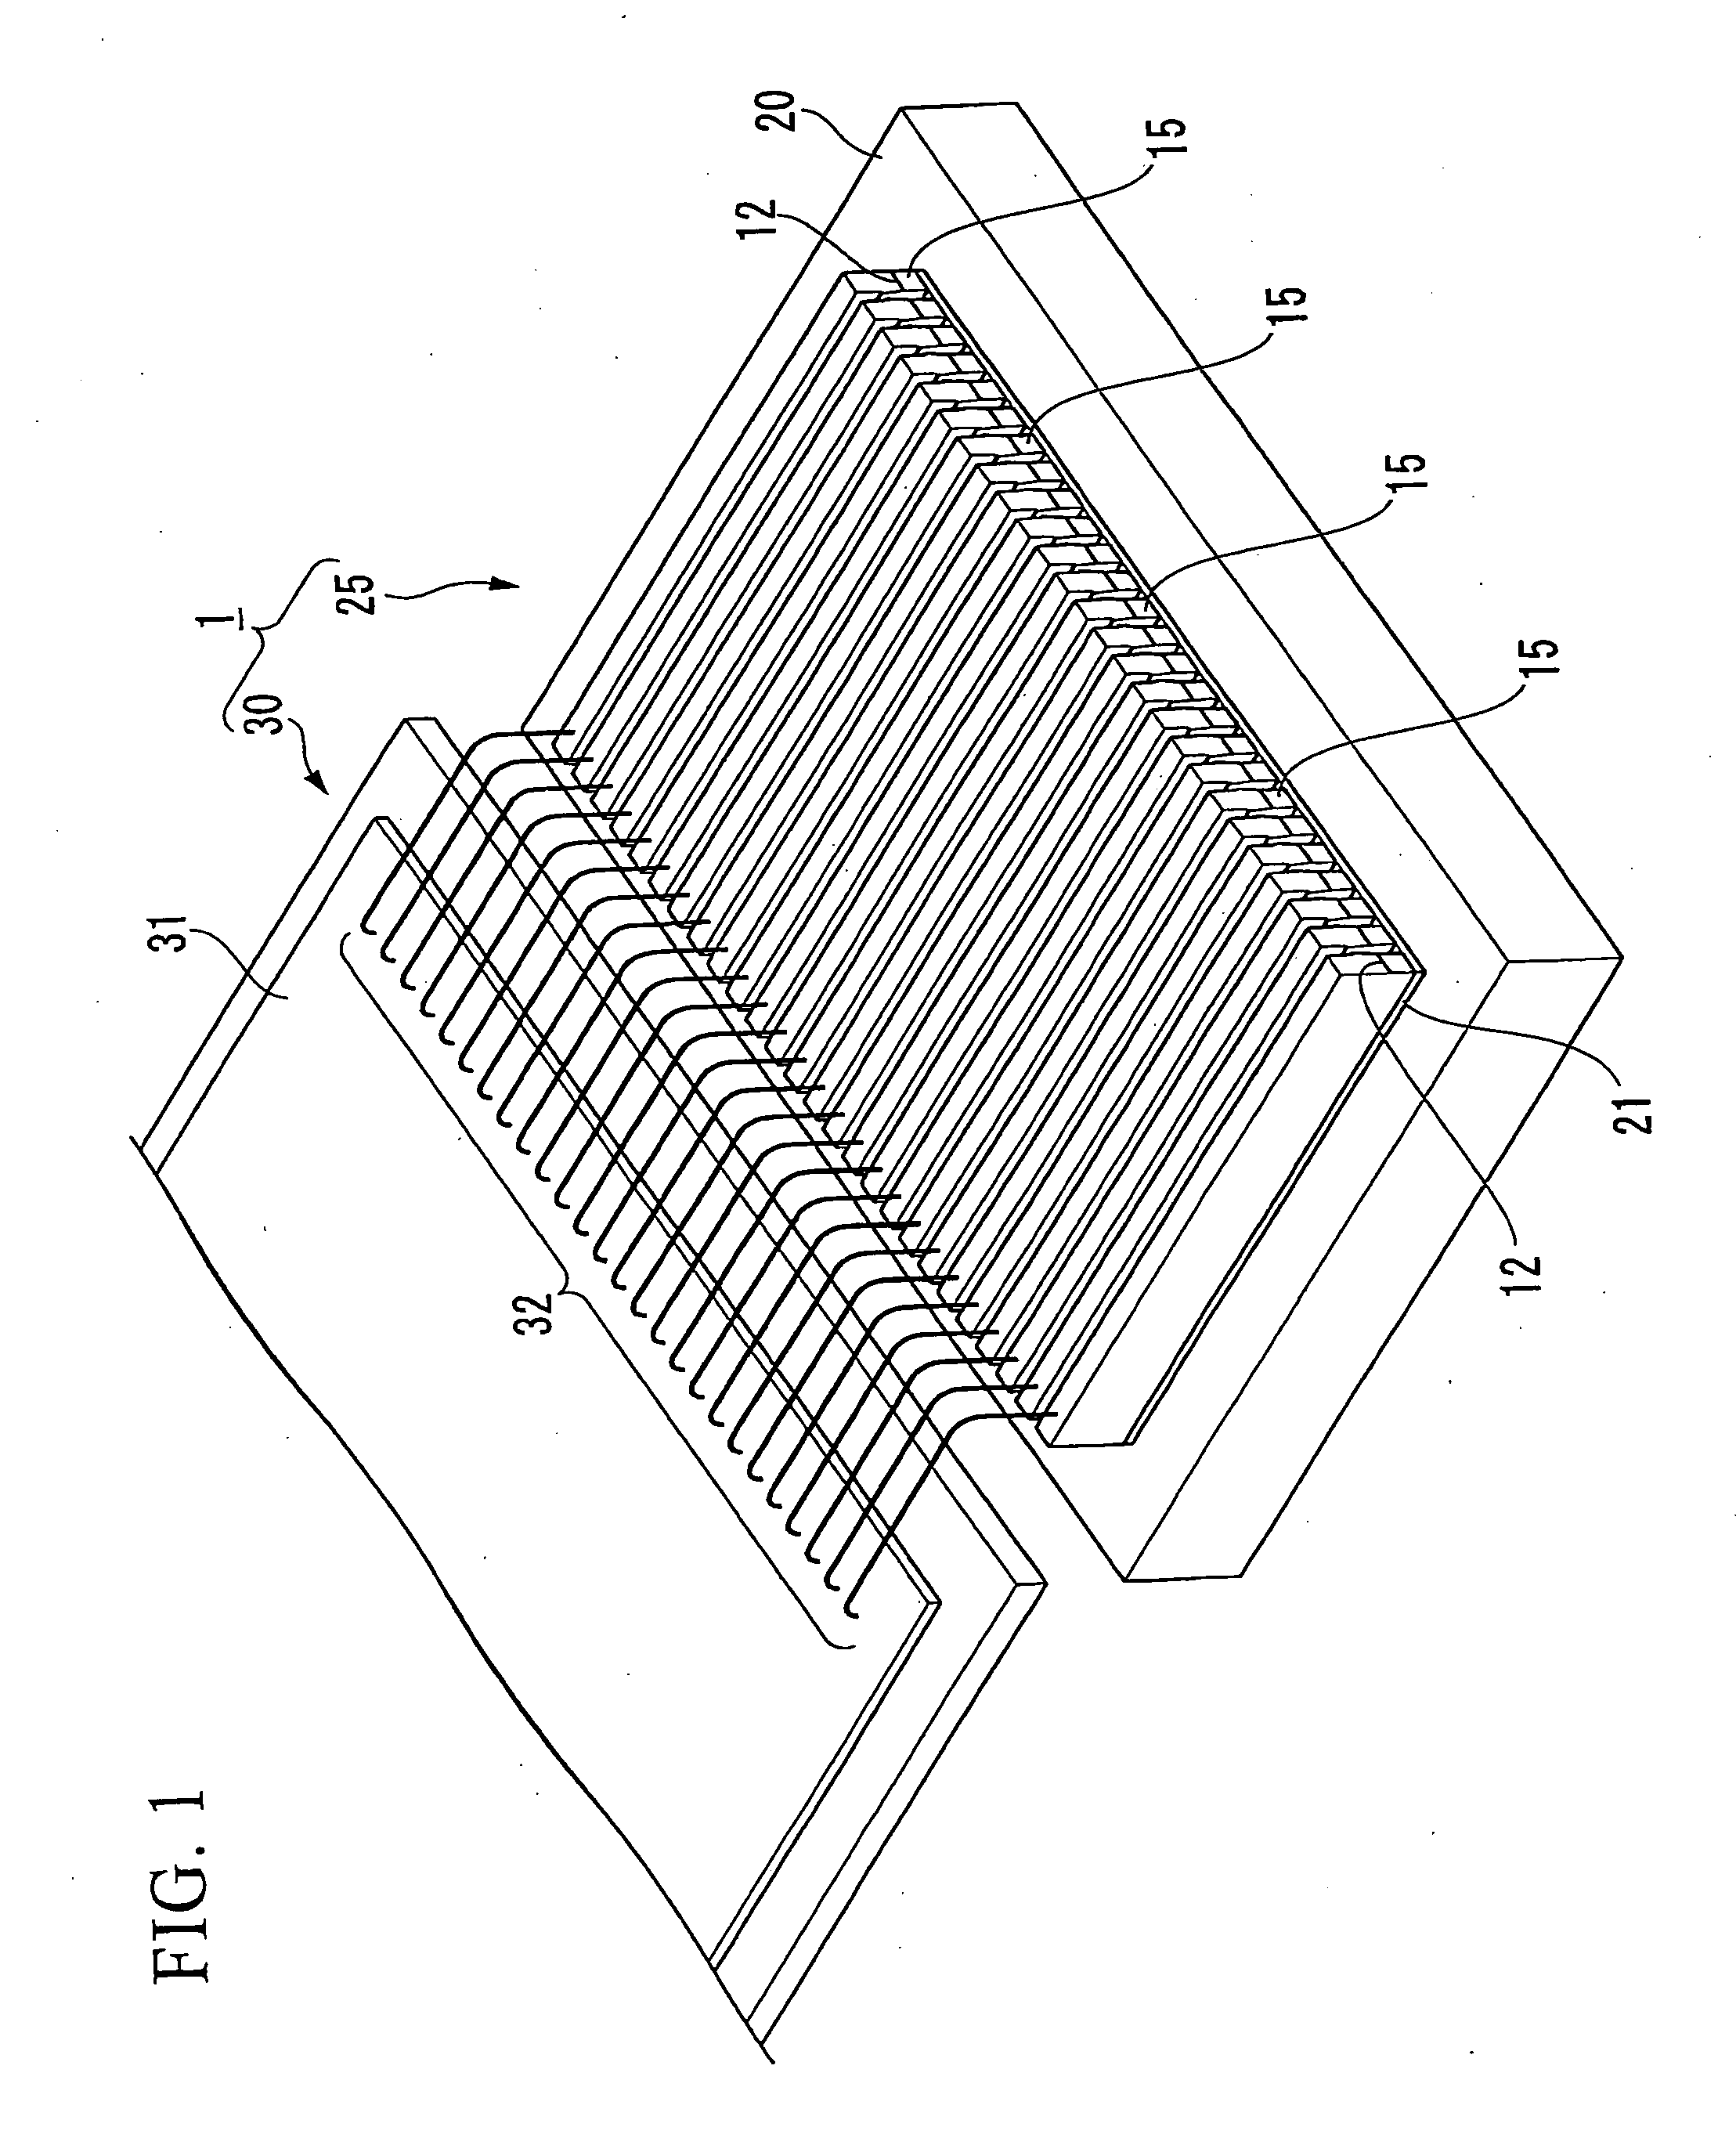 Laser array chip, laser module, manufacturing method for manufacturing laser module, manufacturing method for manufacturing laser light source, laser light source, illumination device, monitor, and projector